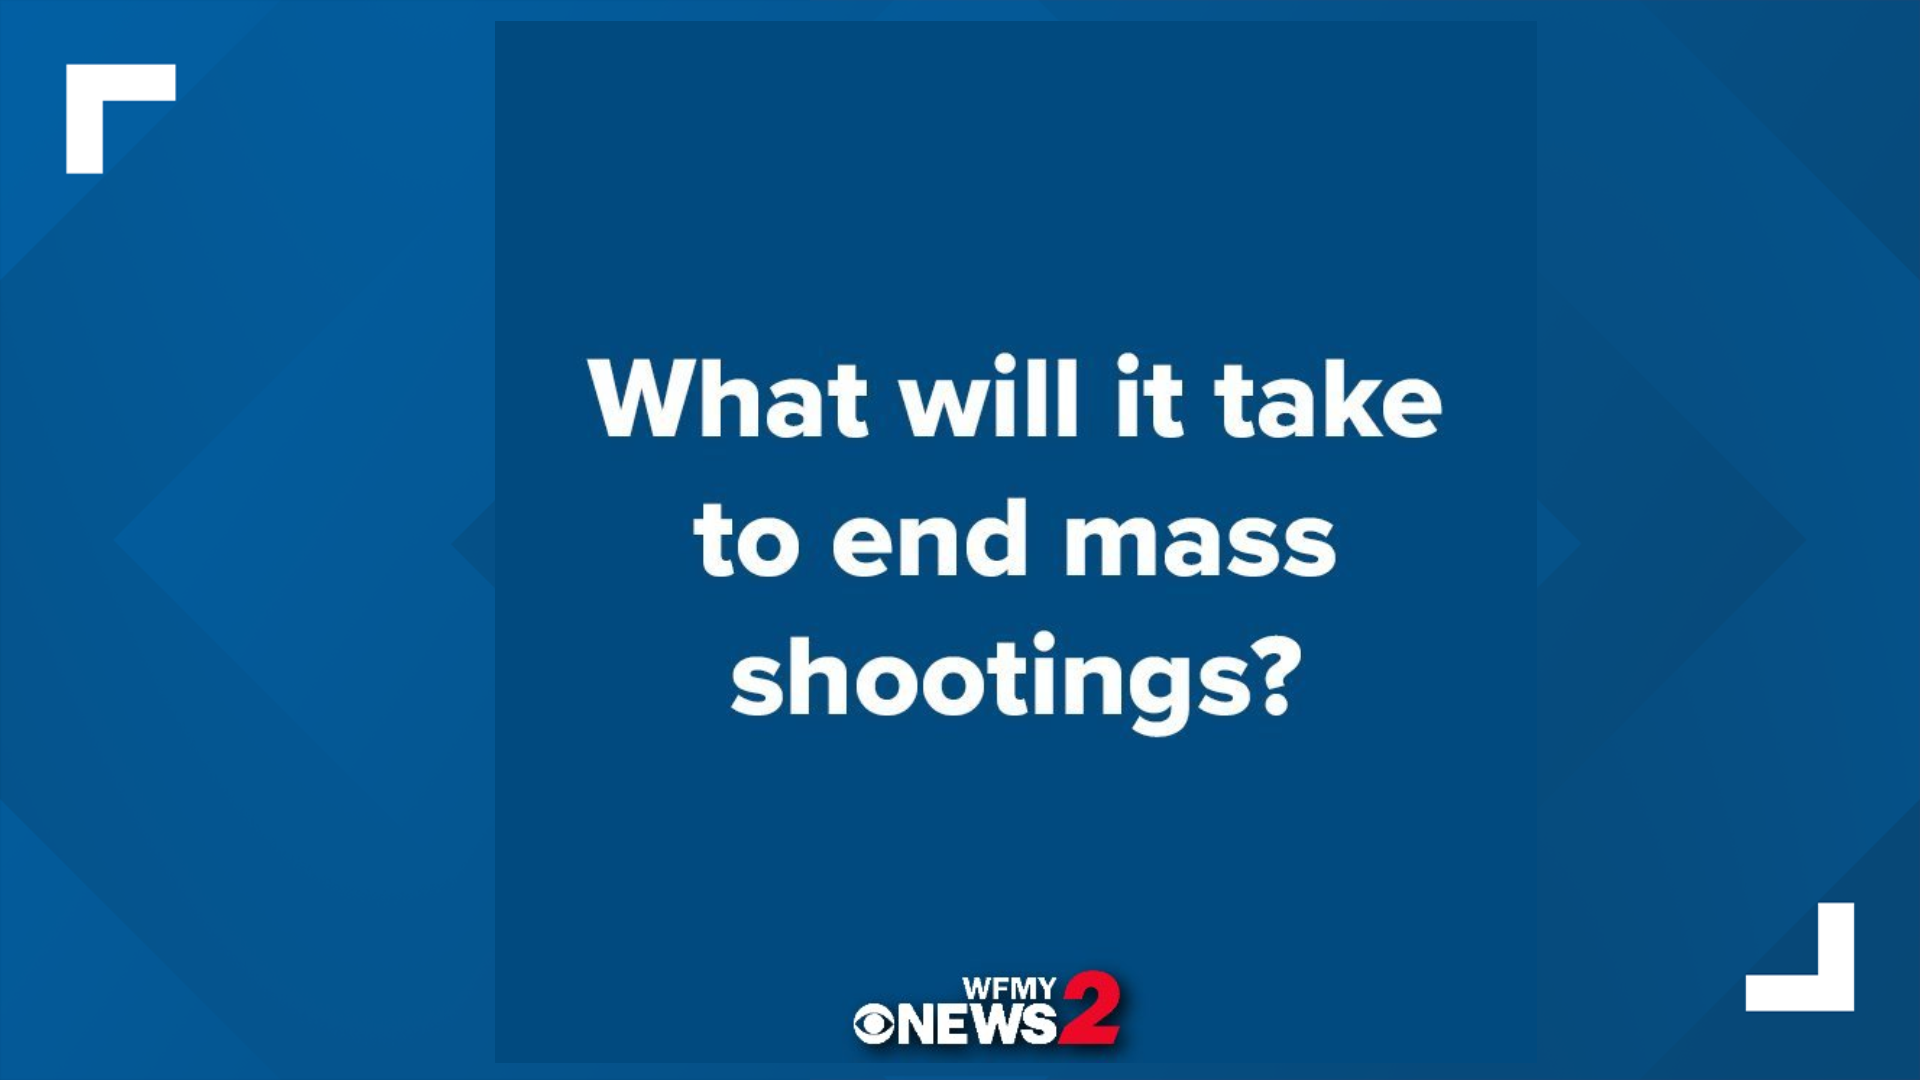 In a matter of 13 hours, 31 people died in mass shootings in El Paso and Dayton, Ohio over the weekend. What is the solution to keep it from happening again?